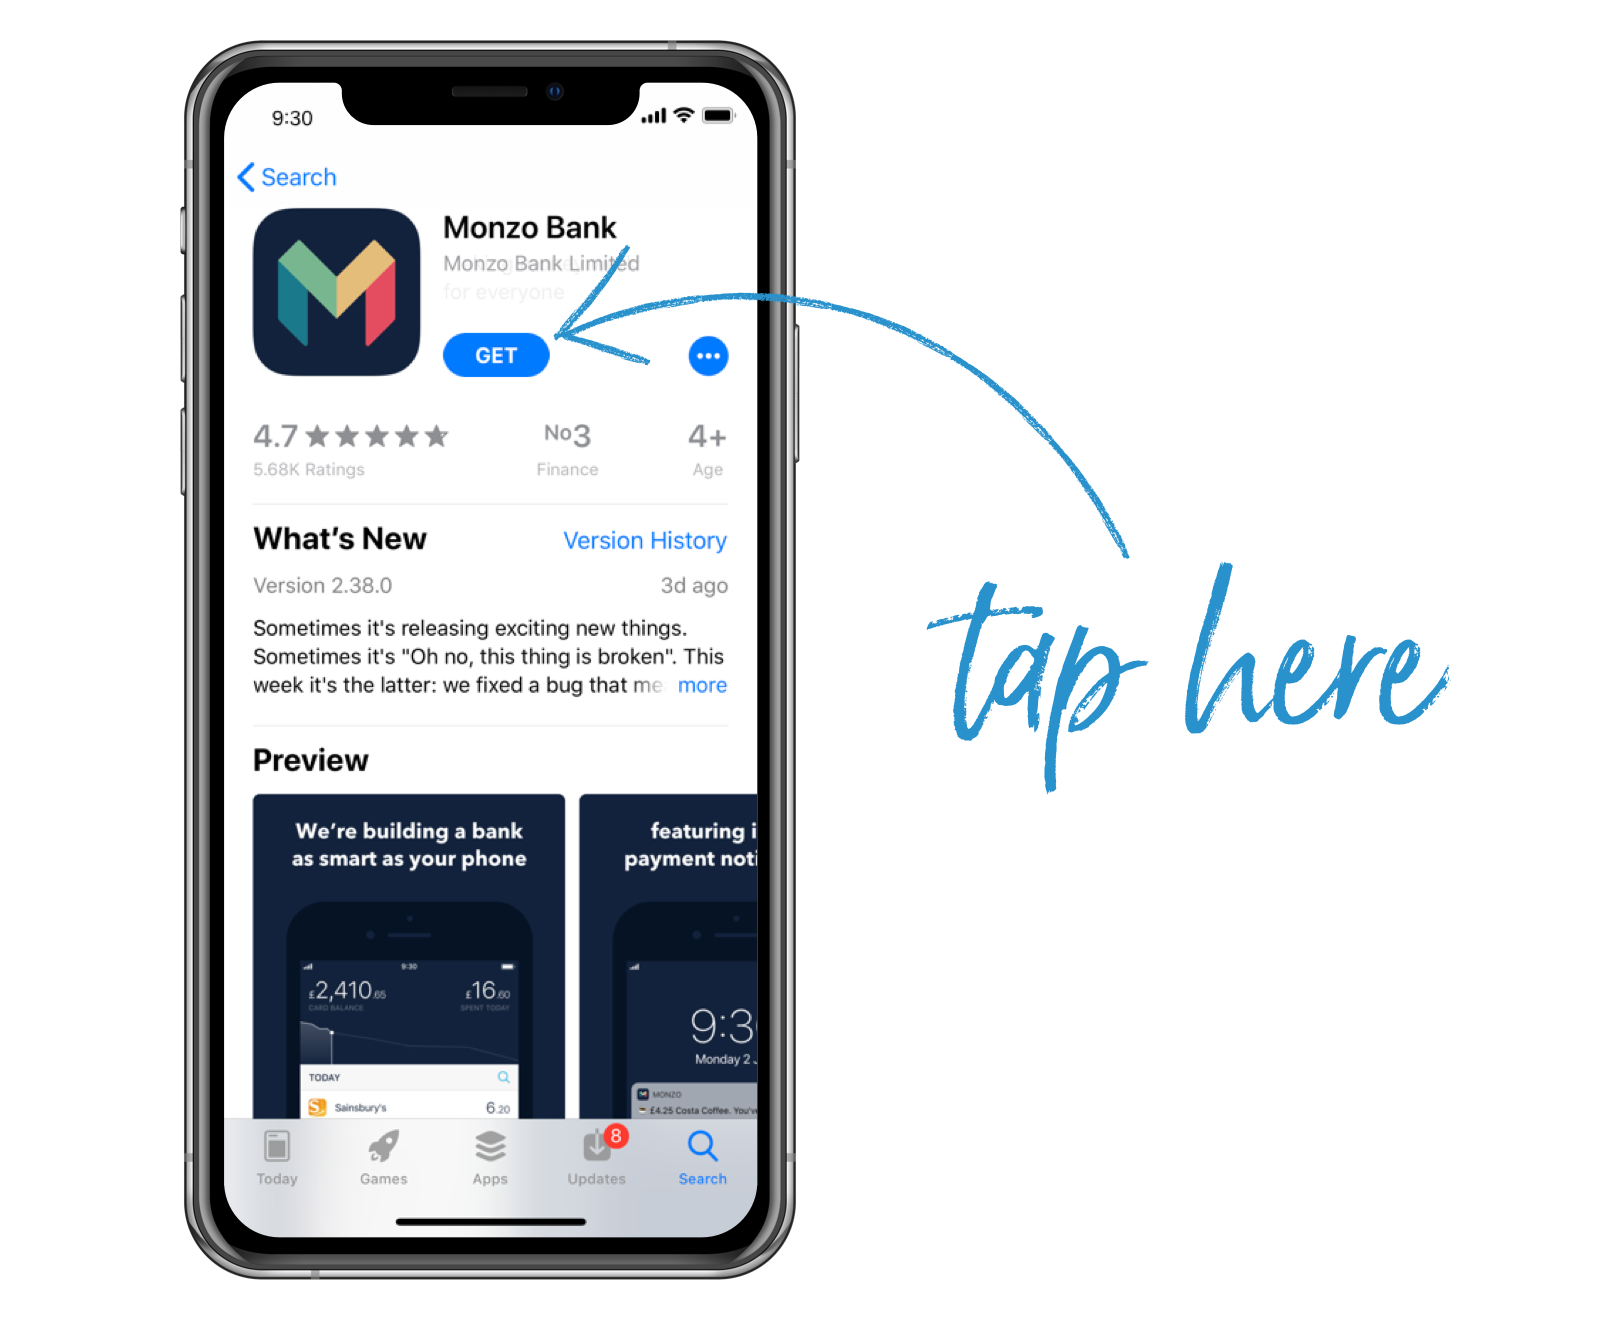 Screenshot of the Monzo app in the Google Play Store